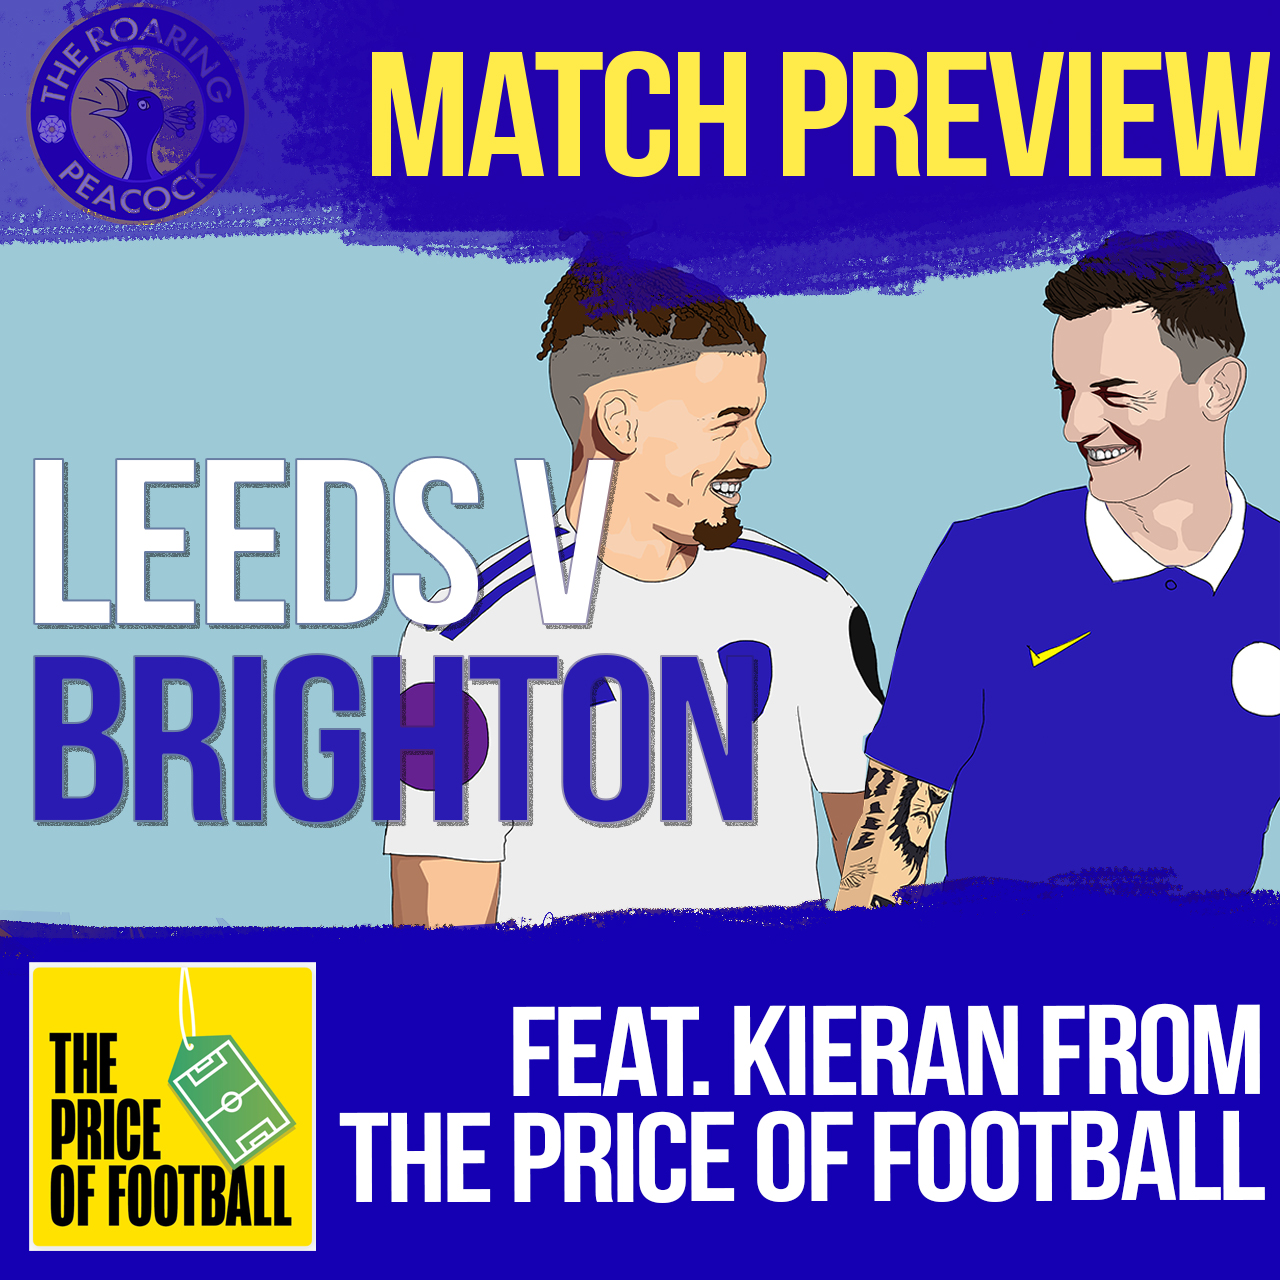 Leeds v Brighton | Match Preview feat. Kieran Maguire from The Price of Football